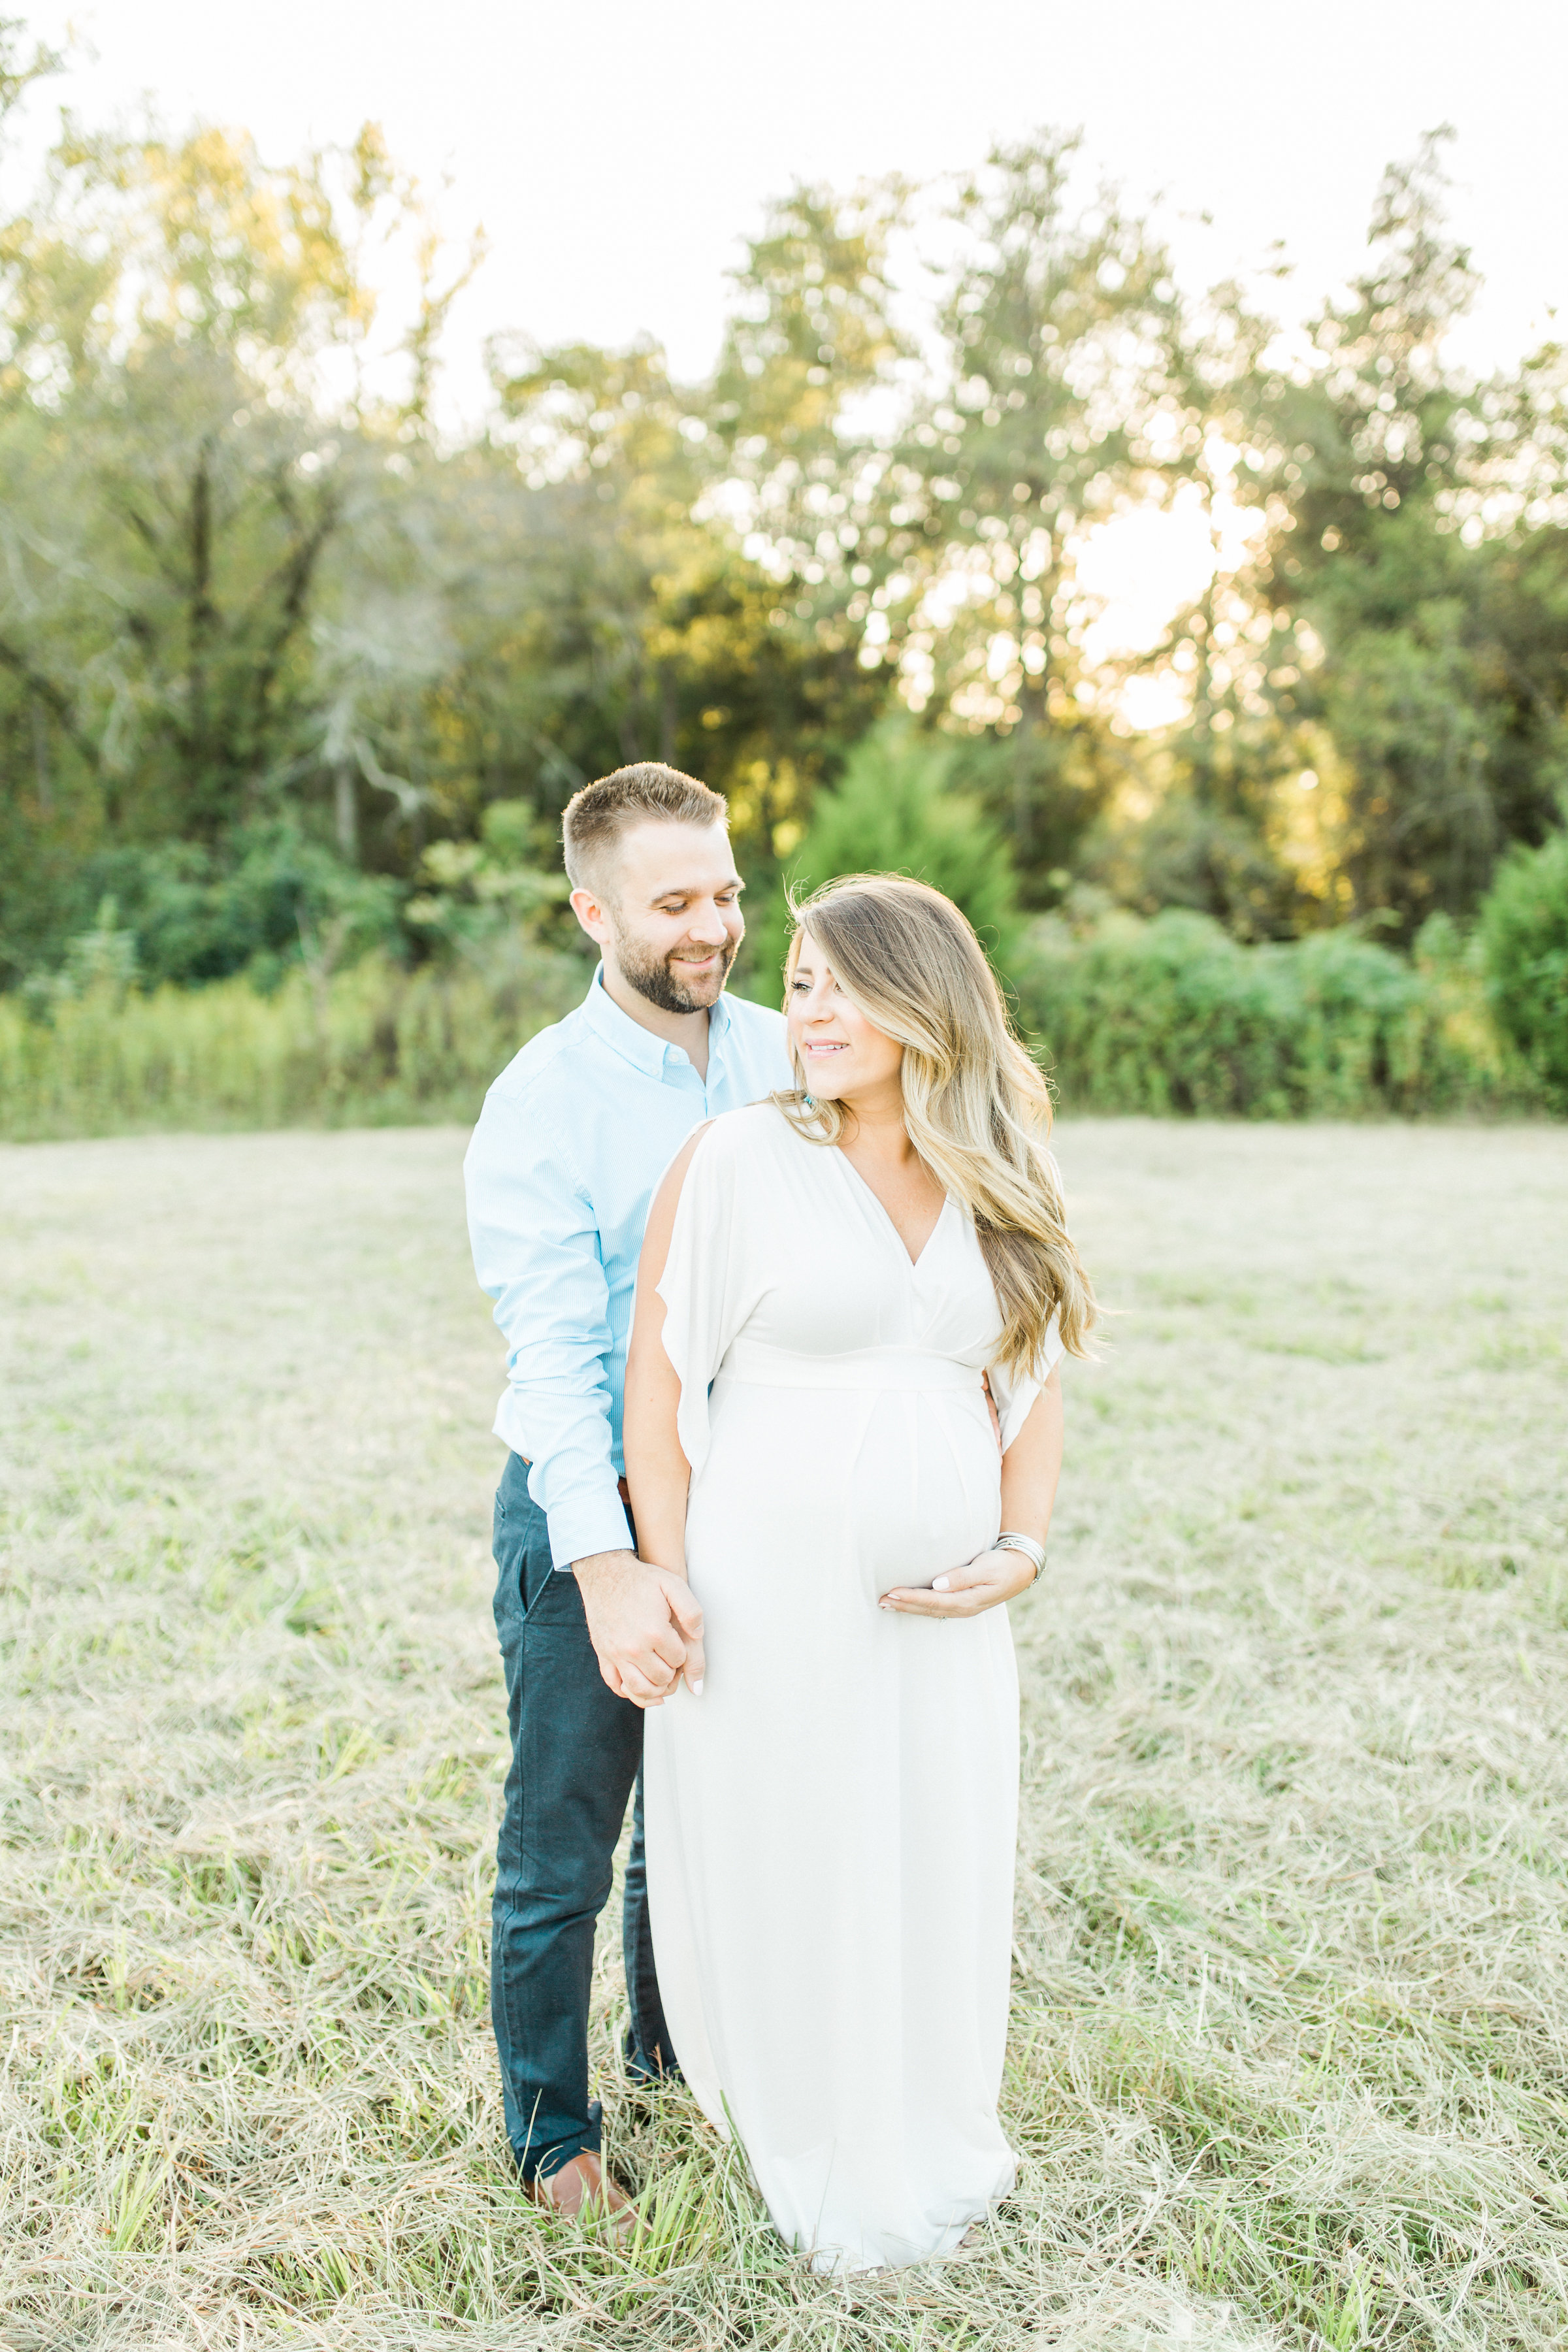 Our Maternity Photoshoot by North Carolina style blogger Coffee Beans and Bobby Pins